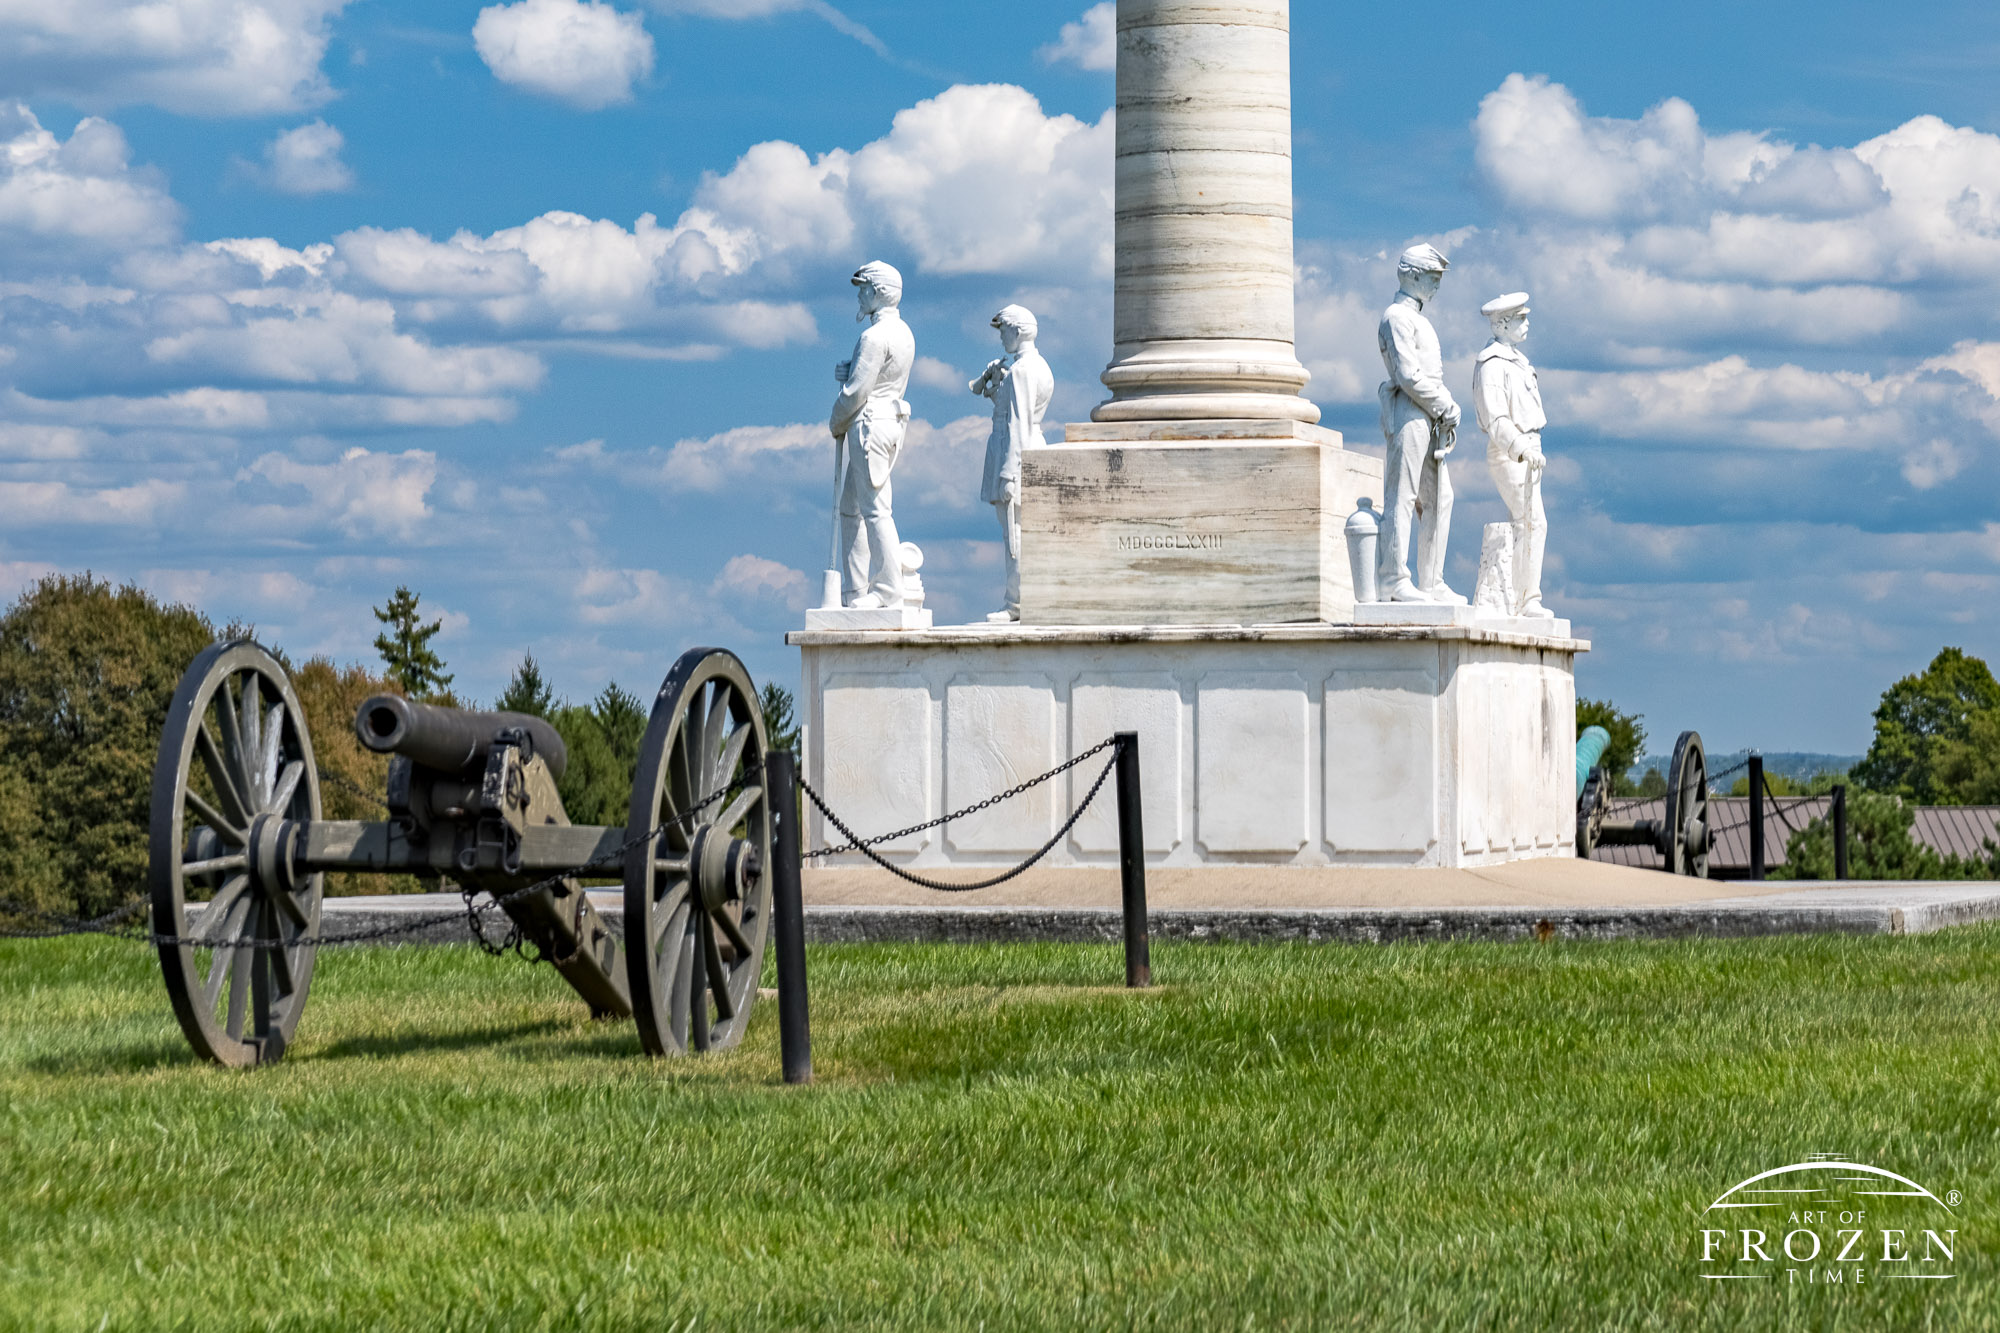 A close view of the center monument of Dayton National Cemetery where the white marble Civil War era soldiers watch over the acres of Veteran headstones that stretches on for acres